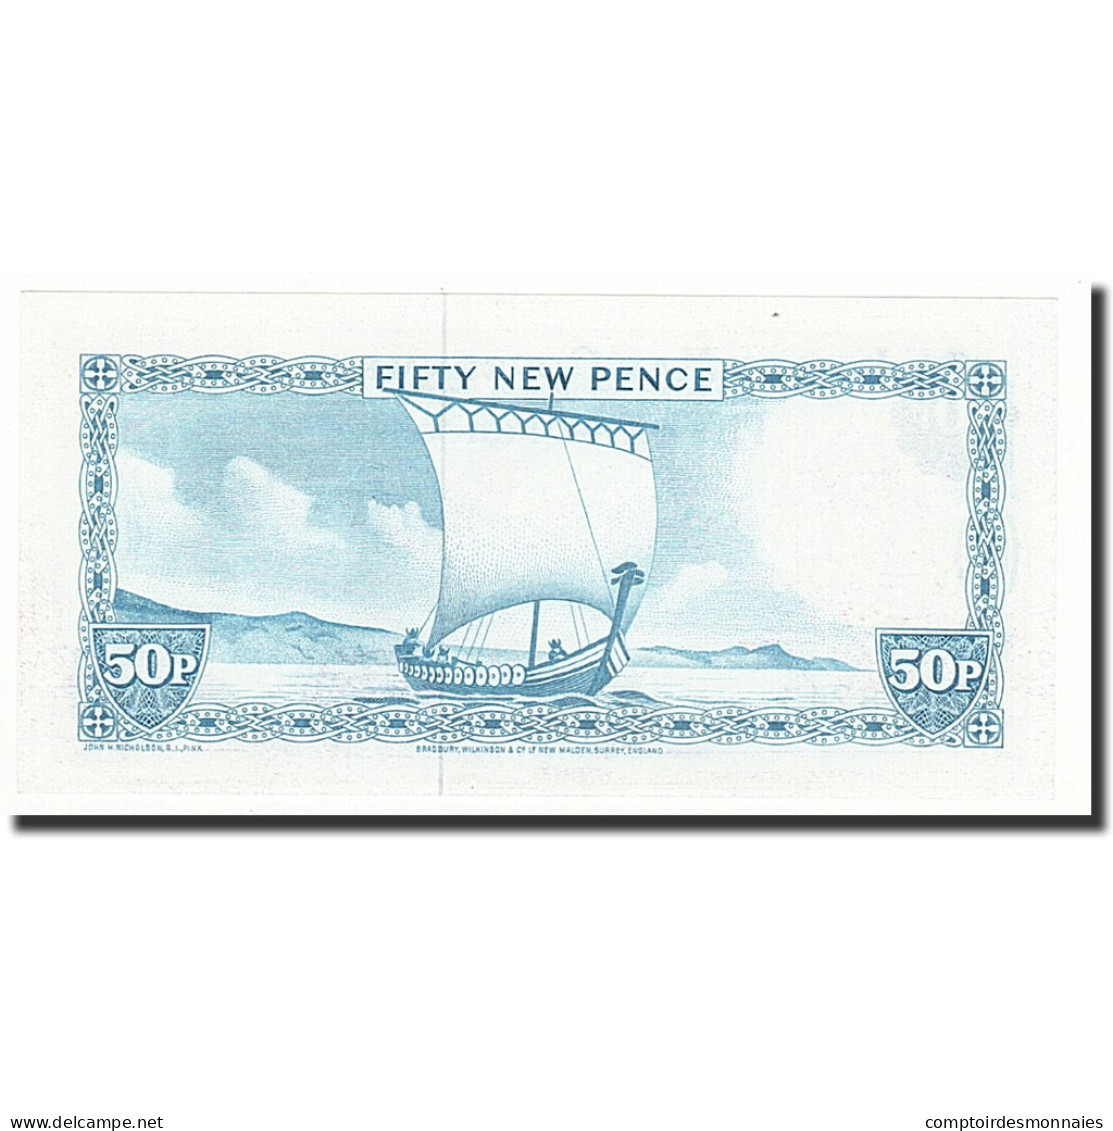 Billet, Isle Of Man, 50 New Pence, Undated (1969), Undated, KM:27A, NEUF - 50 New-pence